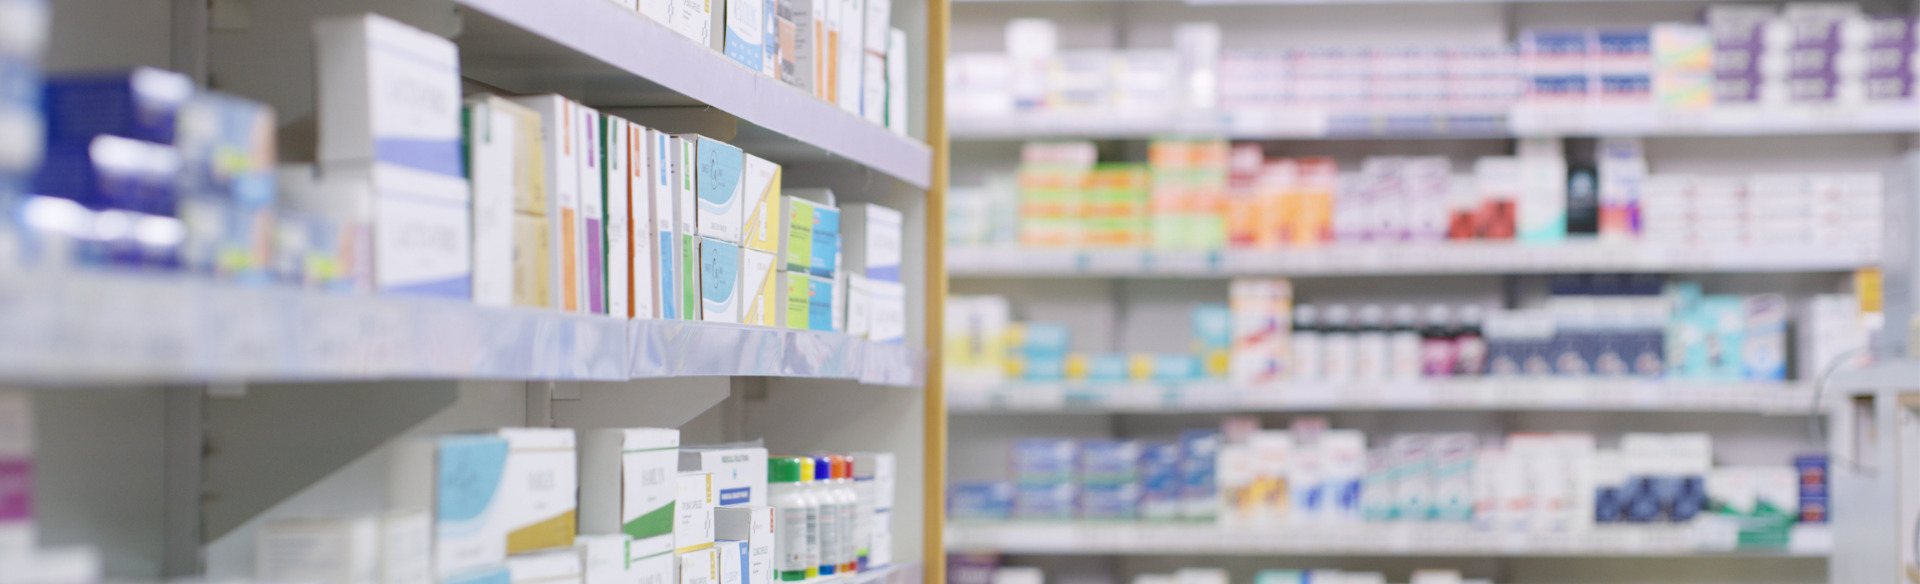 pharmacy shelves with various medications and prescriptions